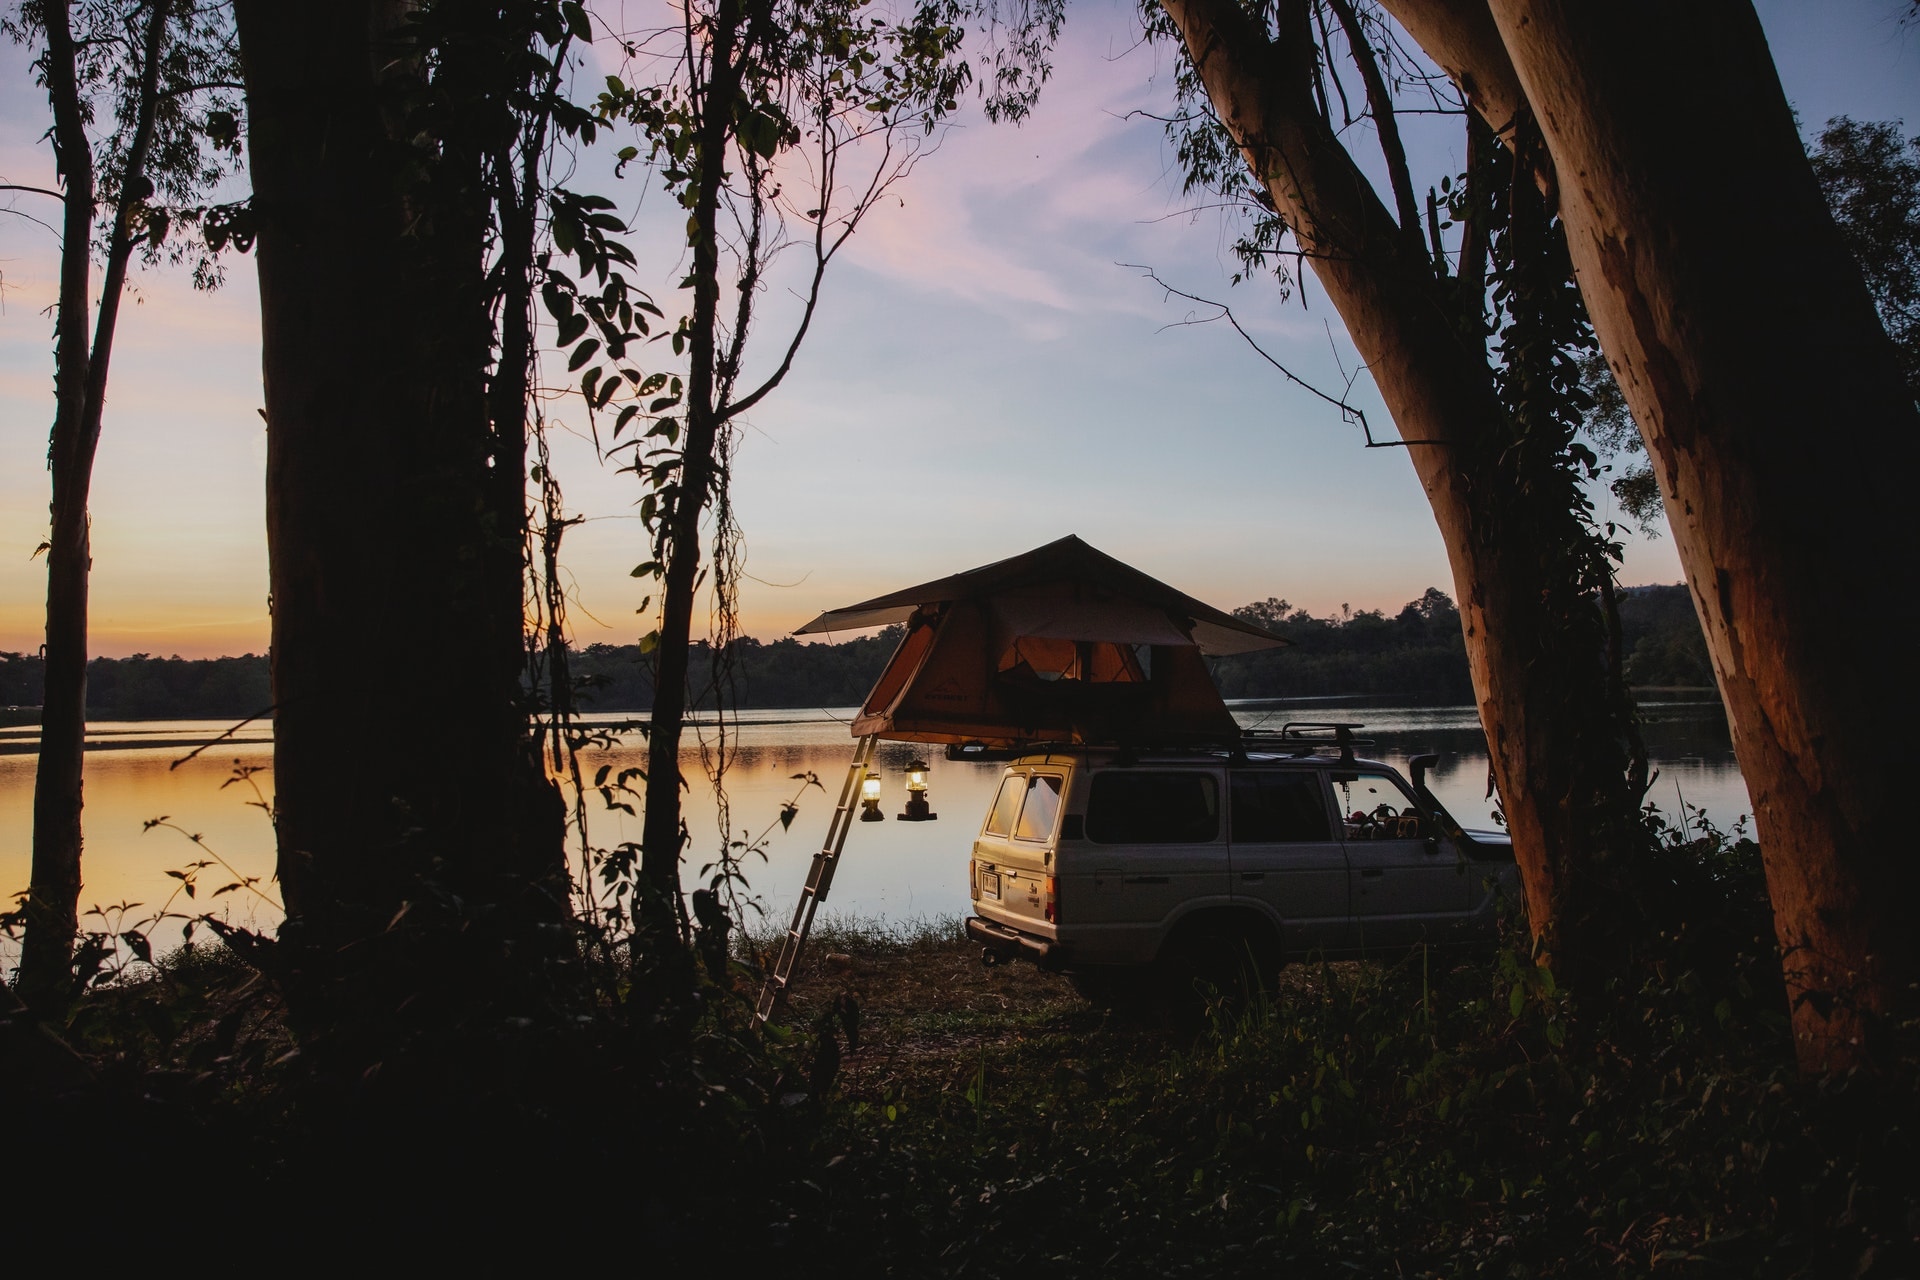 Car Camping: Tips for Sleeping in Your Car